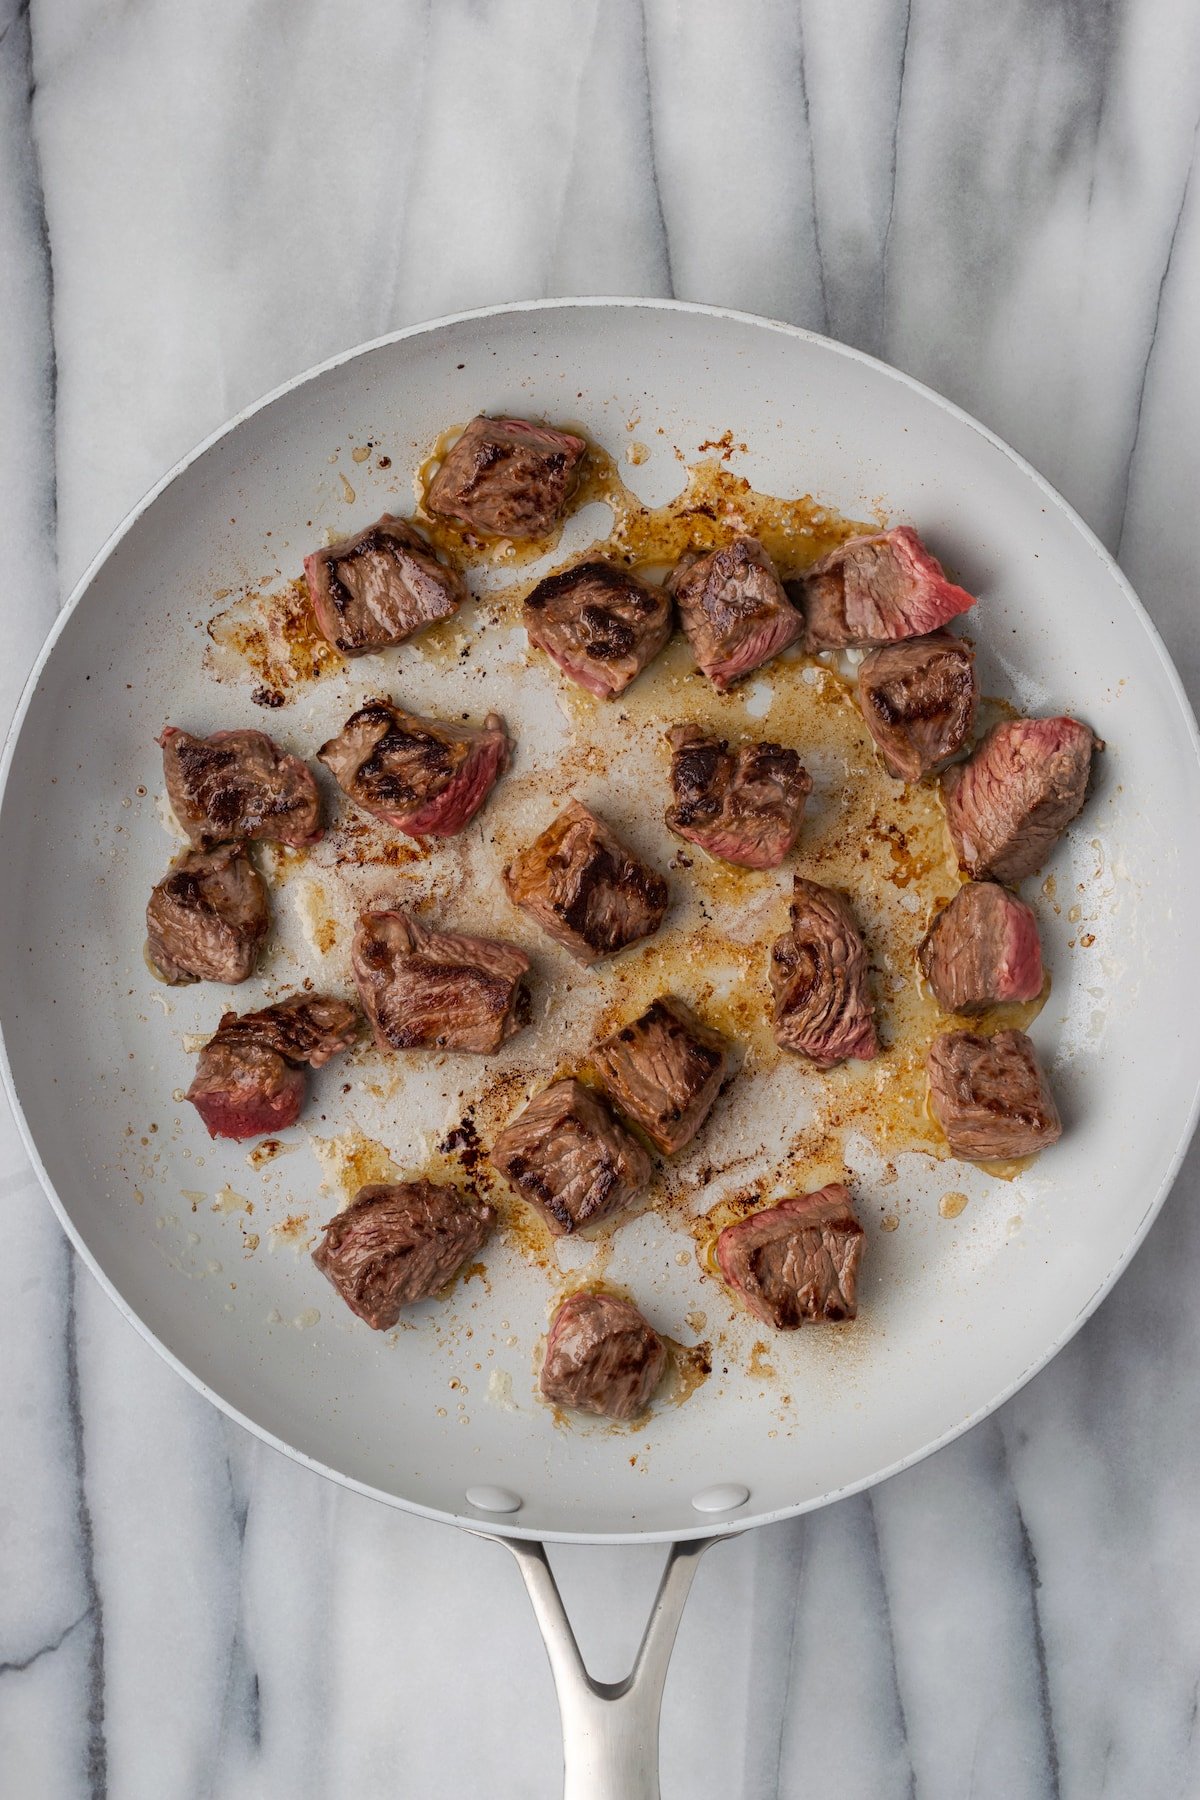 Steak bites searing in a skillet on multiple sides, not touching